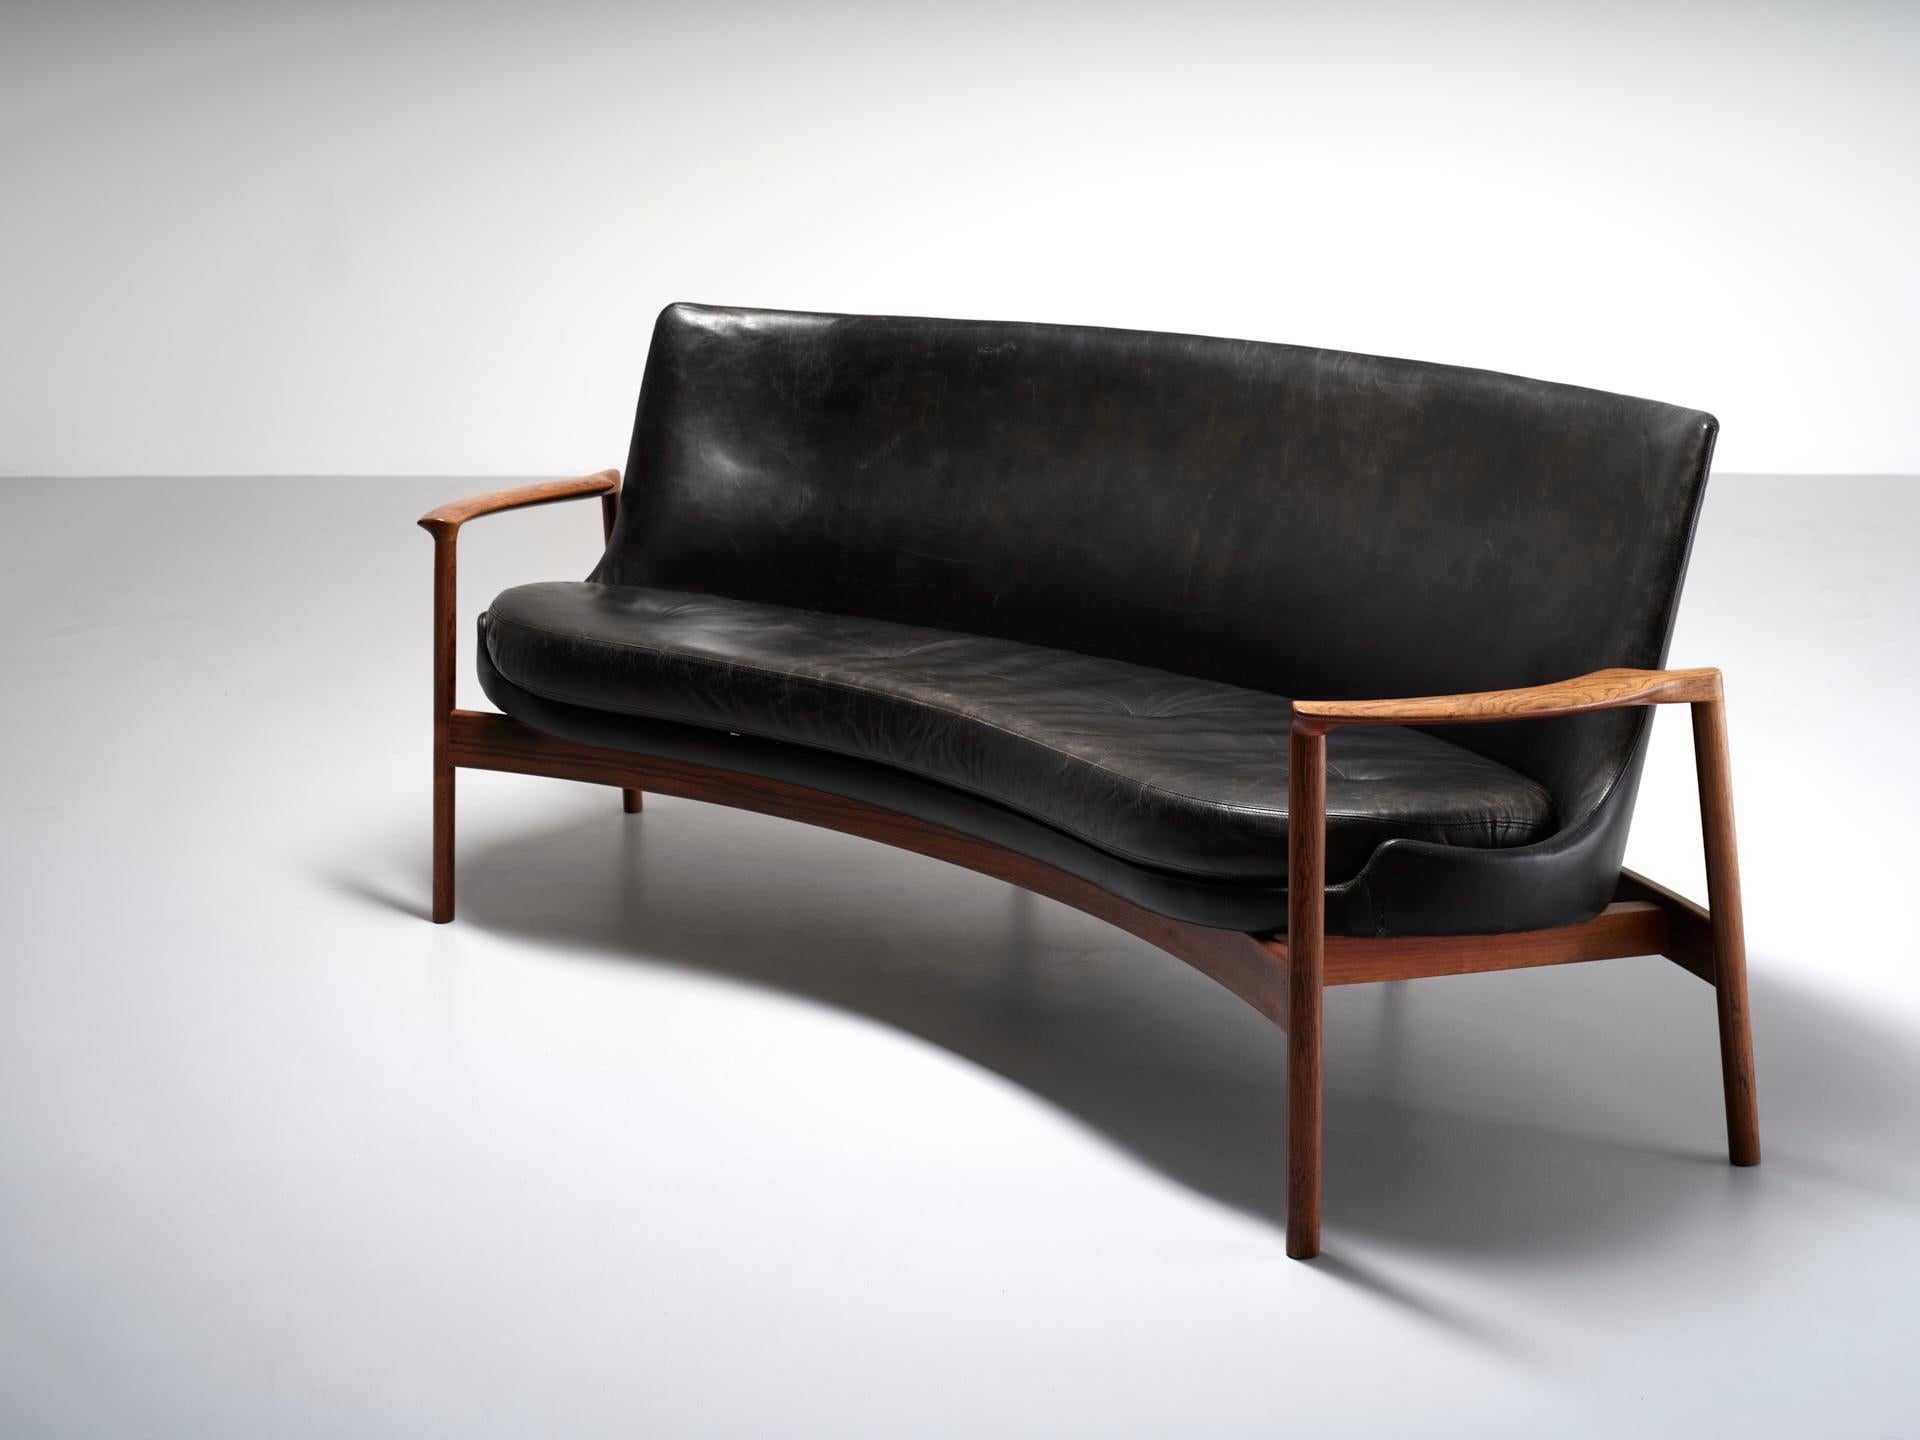 A seating group consisting of 2 easy chairs, a kidney shaped sofa and a matching coffee table. The set is designed by Ib Kofod-Larsen in 1974 for Fröscher in Germany. The seats are restored with new quality foam, while maintaining the original black